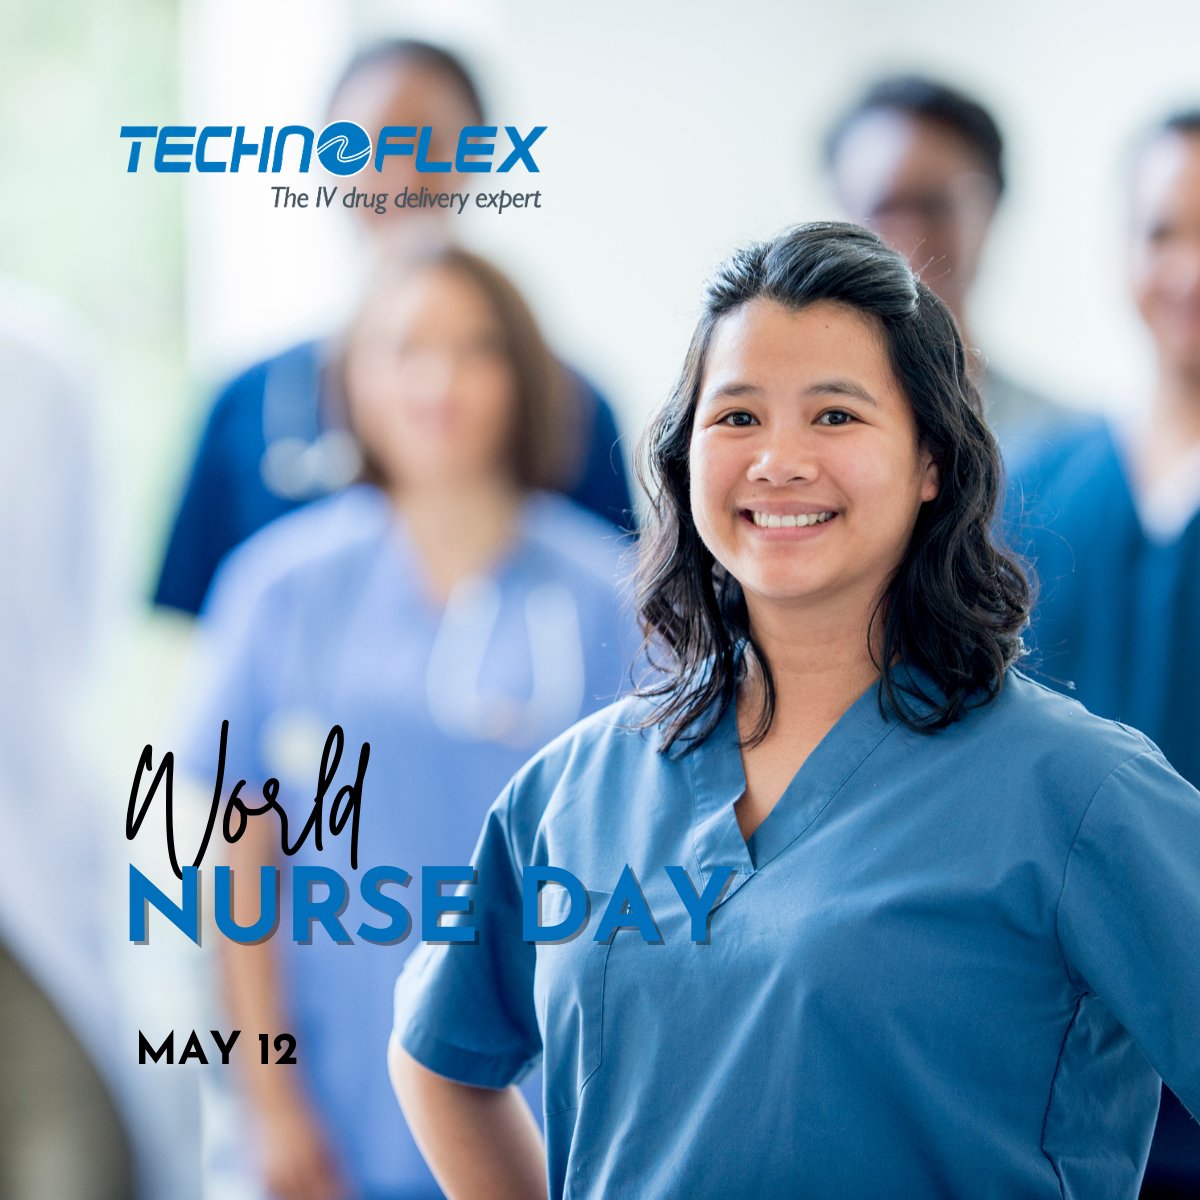 👩🏽‍⚕️All Technoflex teams support the World Nurse Day, on May 12th.
We acknowledge that nurses are the foundation of our healthcare system and fulfill an indispensable role in improving the well-being of millions of people worldwide.

#NursesSaveLives #RaiseAwareness #MedTech #IVBag